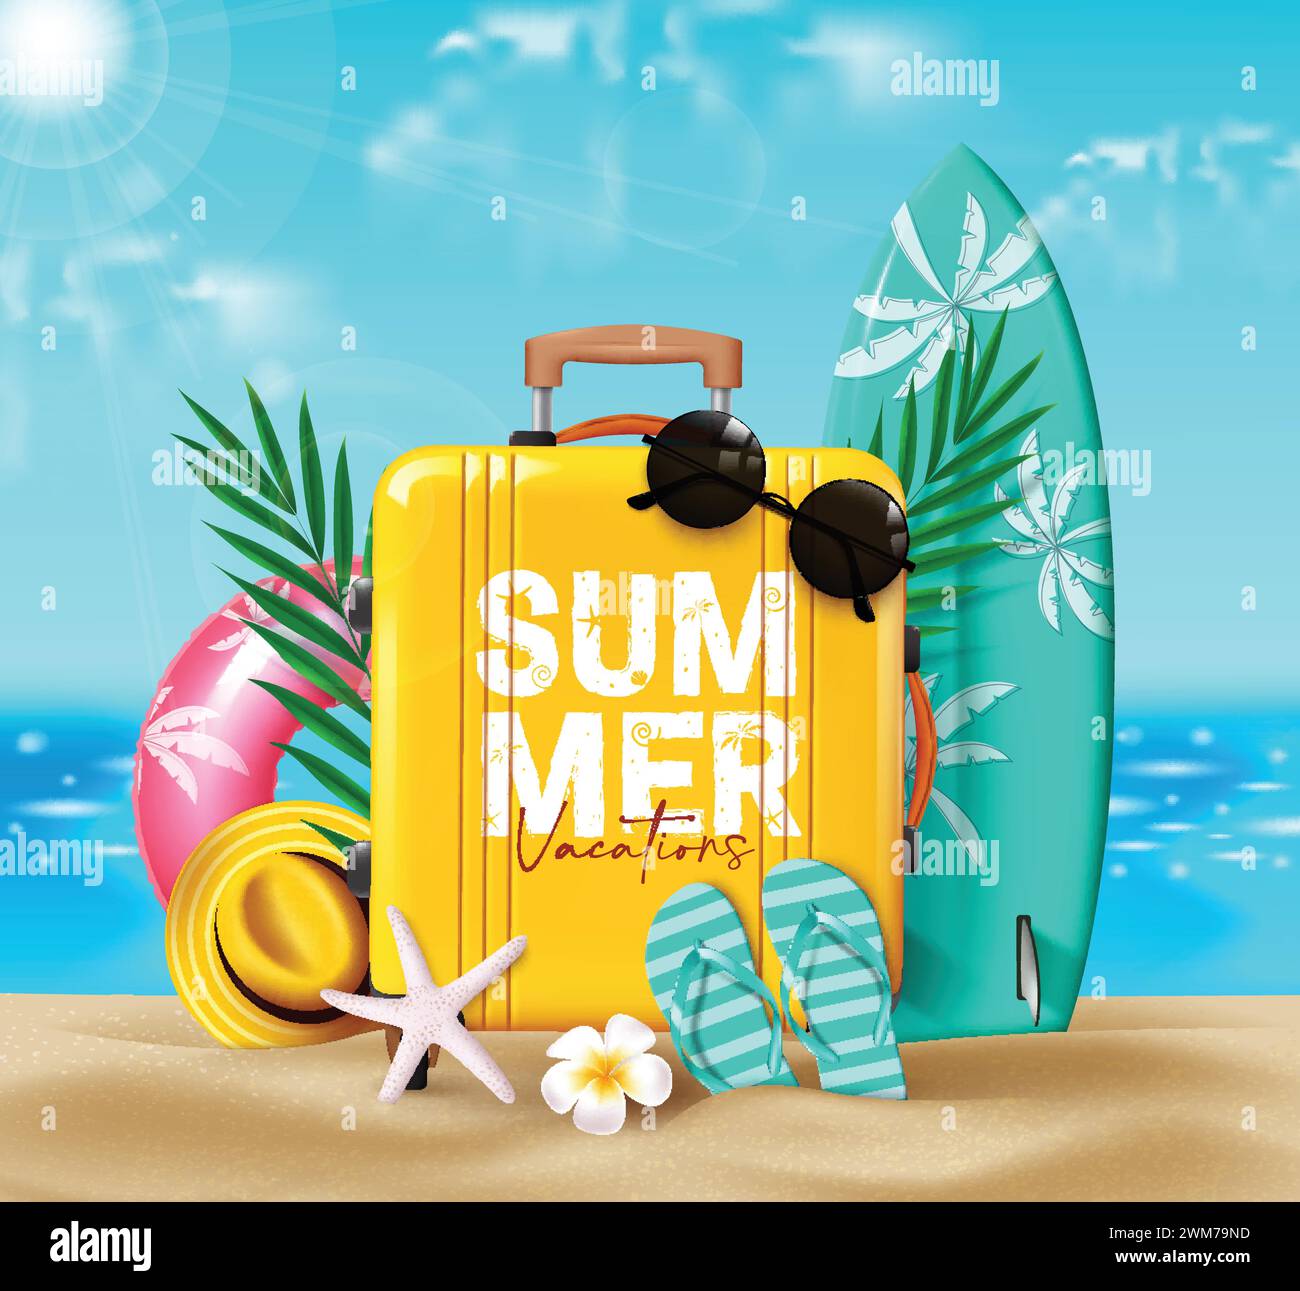 Summer travel luggage vector design. Summer vacation text in yellow suitcase with surfboard, floaters, flipflop and leaf elements in beach seaside Stock Vector